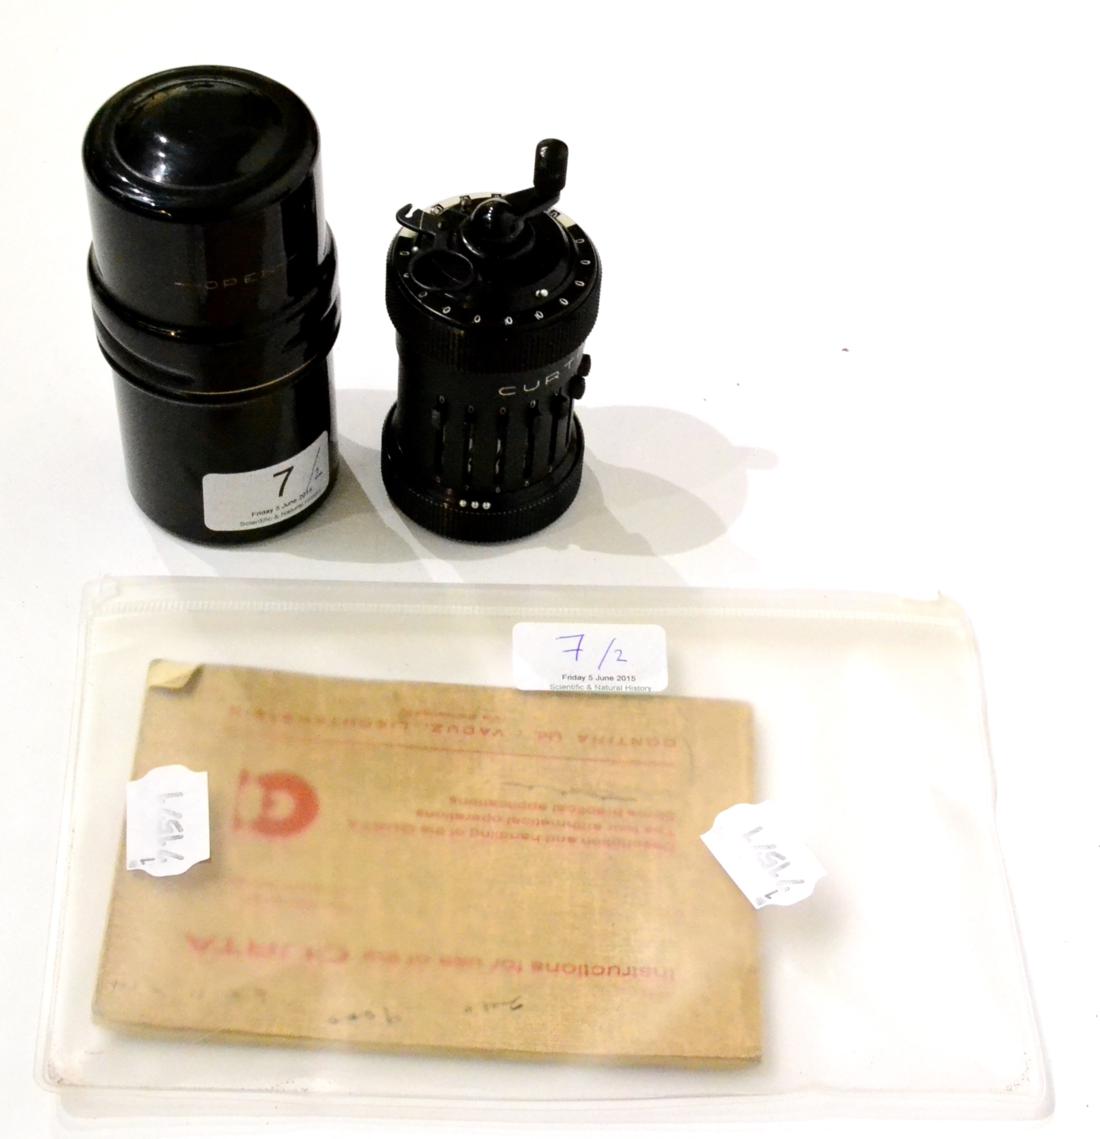 Curta Universal Calculator Type 1 No. 30048 (Excellent) with booklet